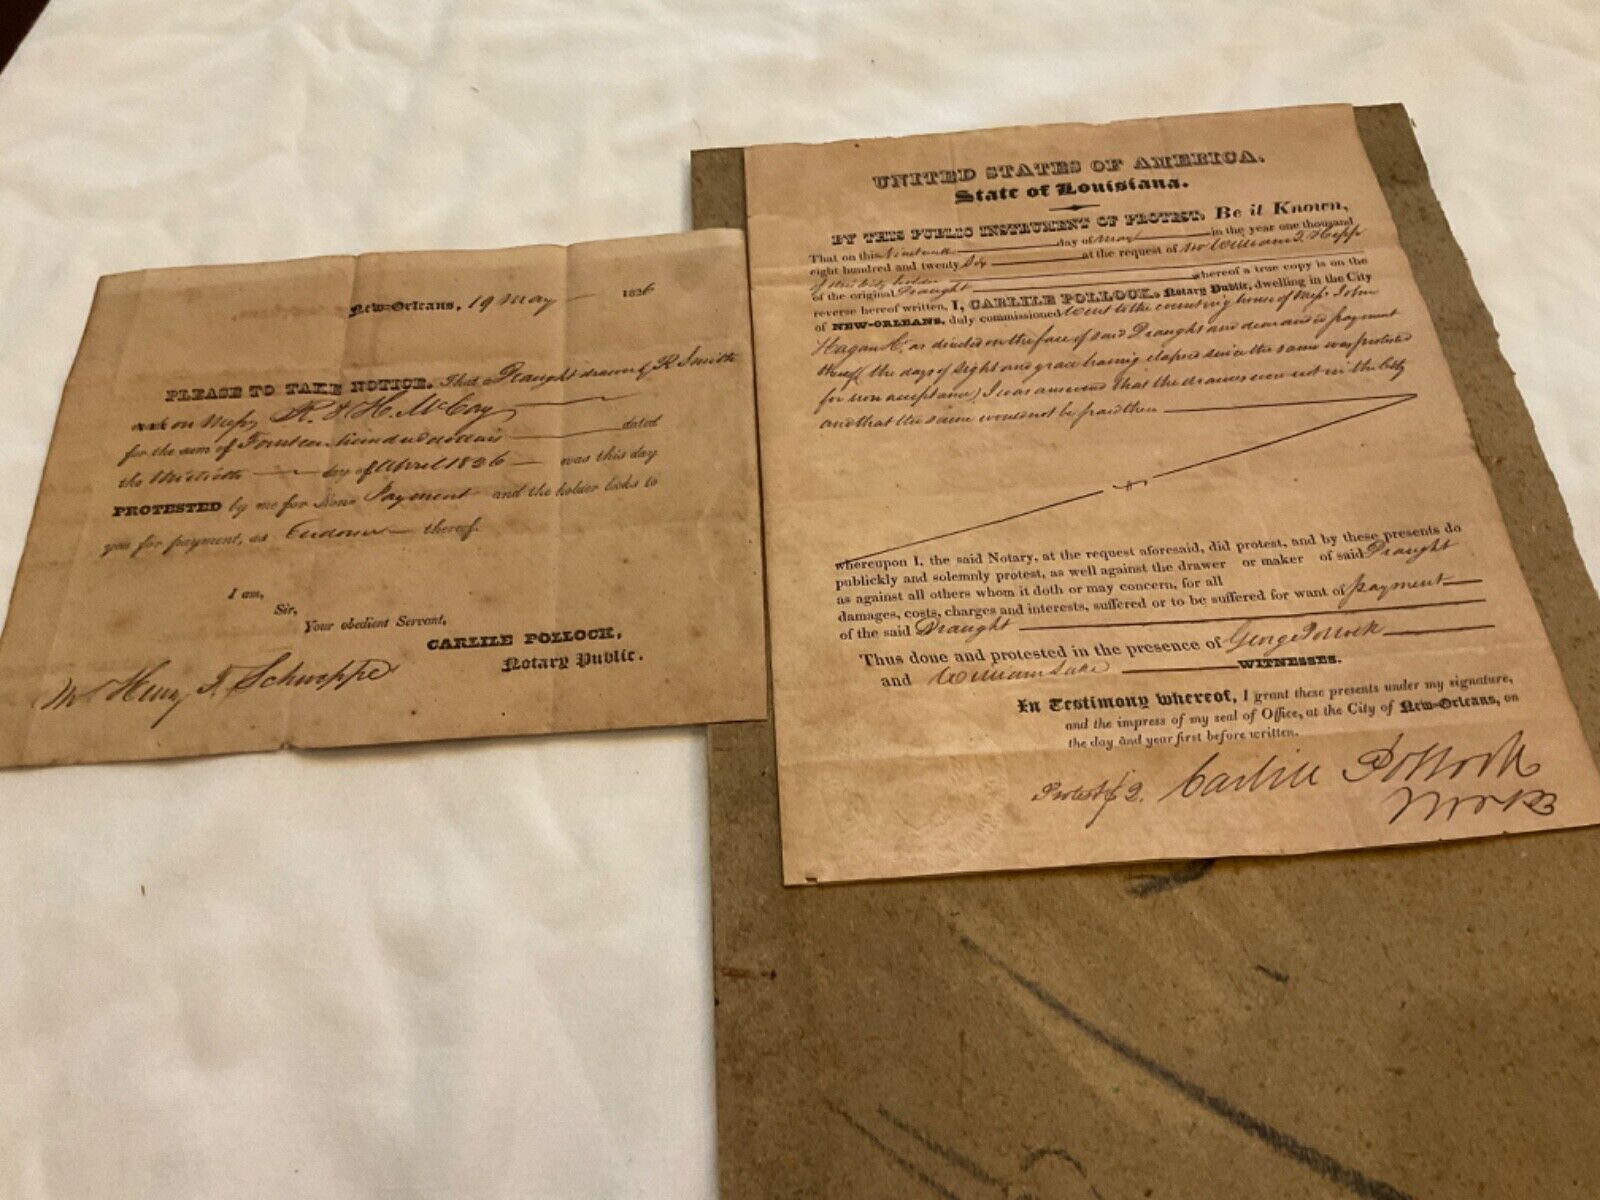 LOUISIANA 1826 INSTRUMENT OF PROTEST NEW ORLEANS FORECLOSURE NOTARY SEALS SIGNER